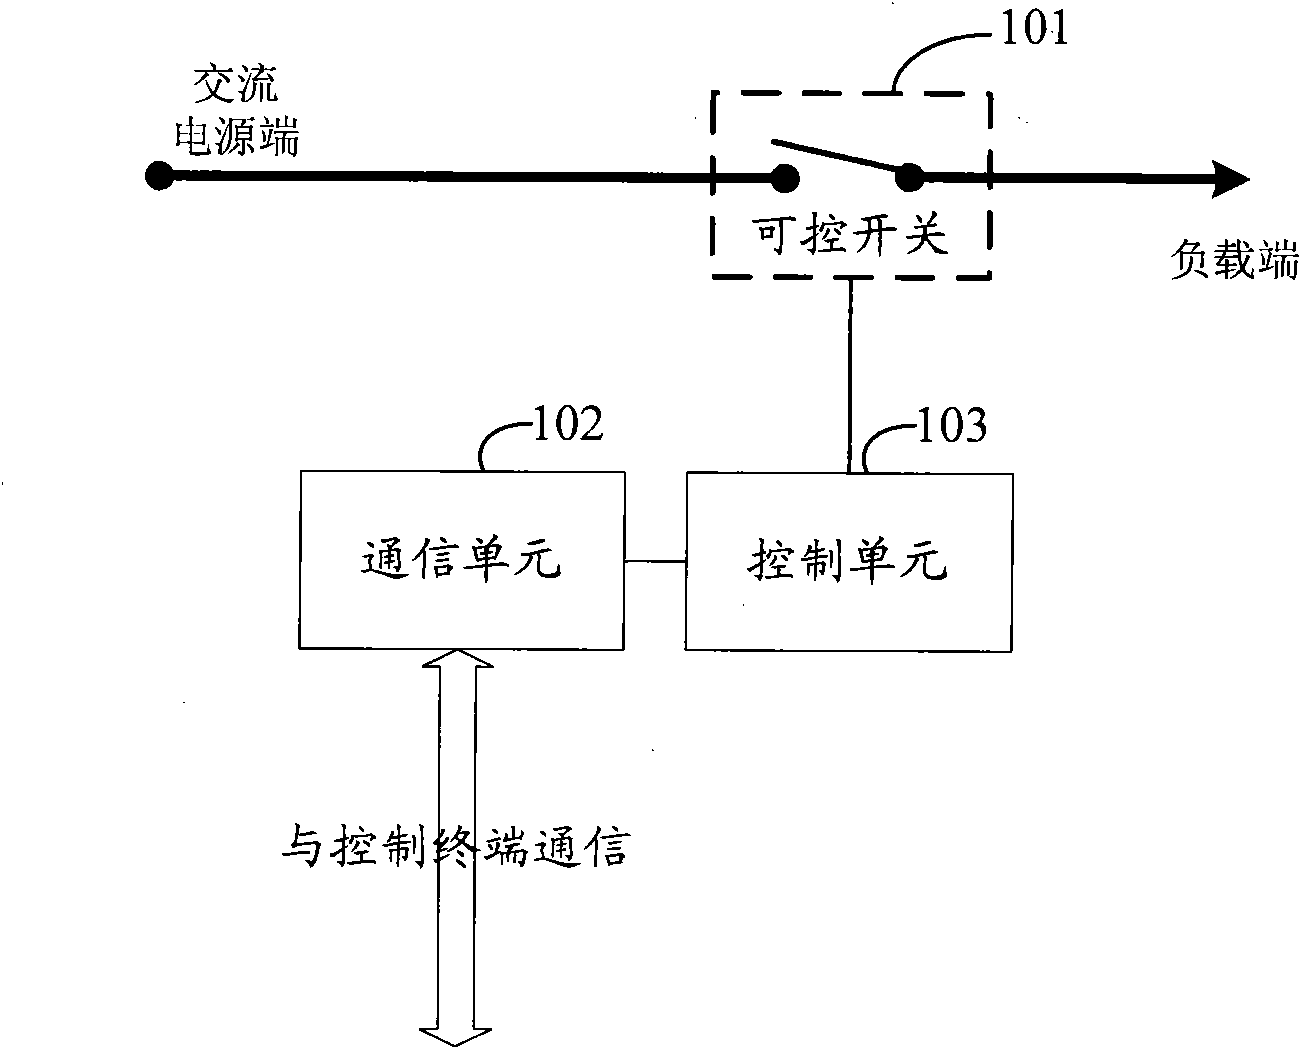 Electric equipment control device and method